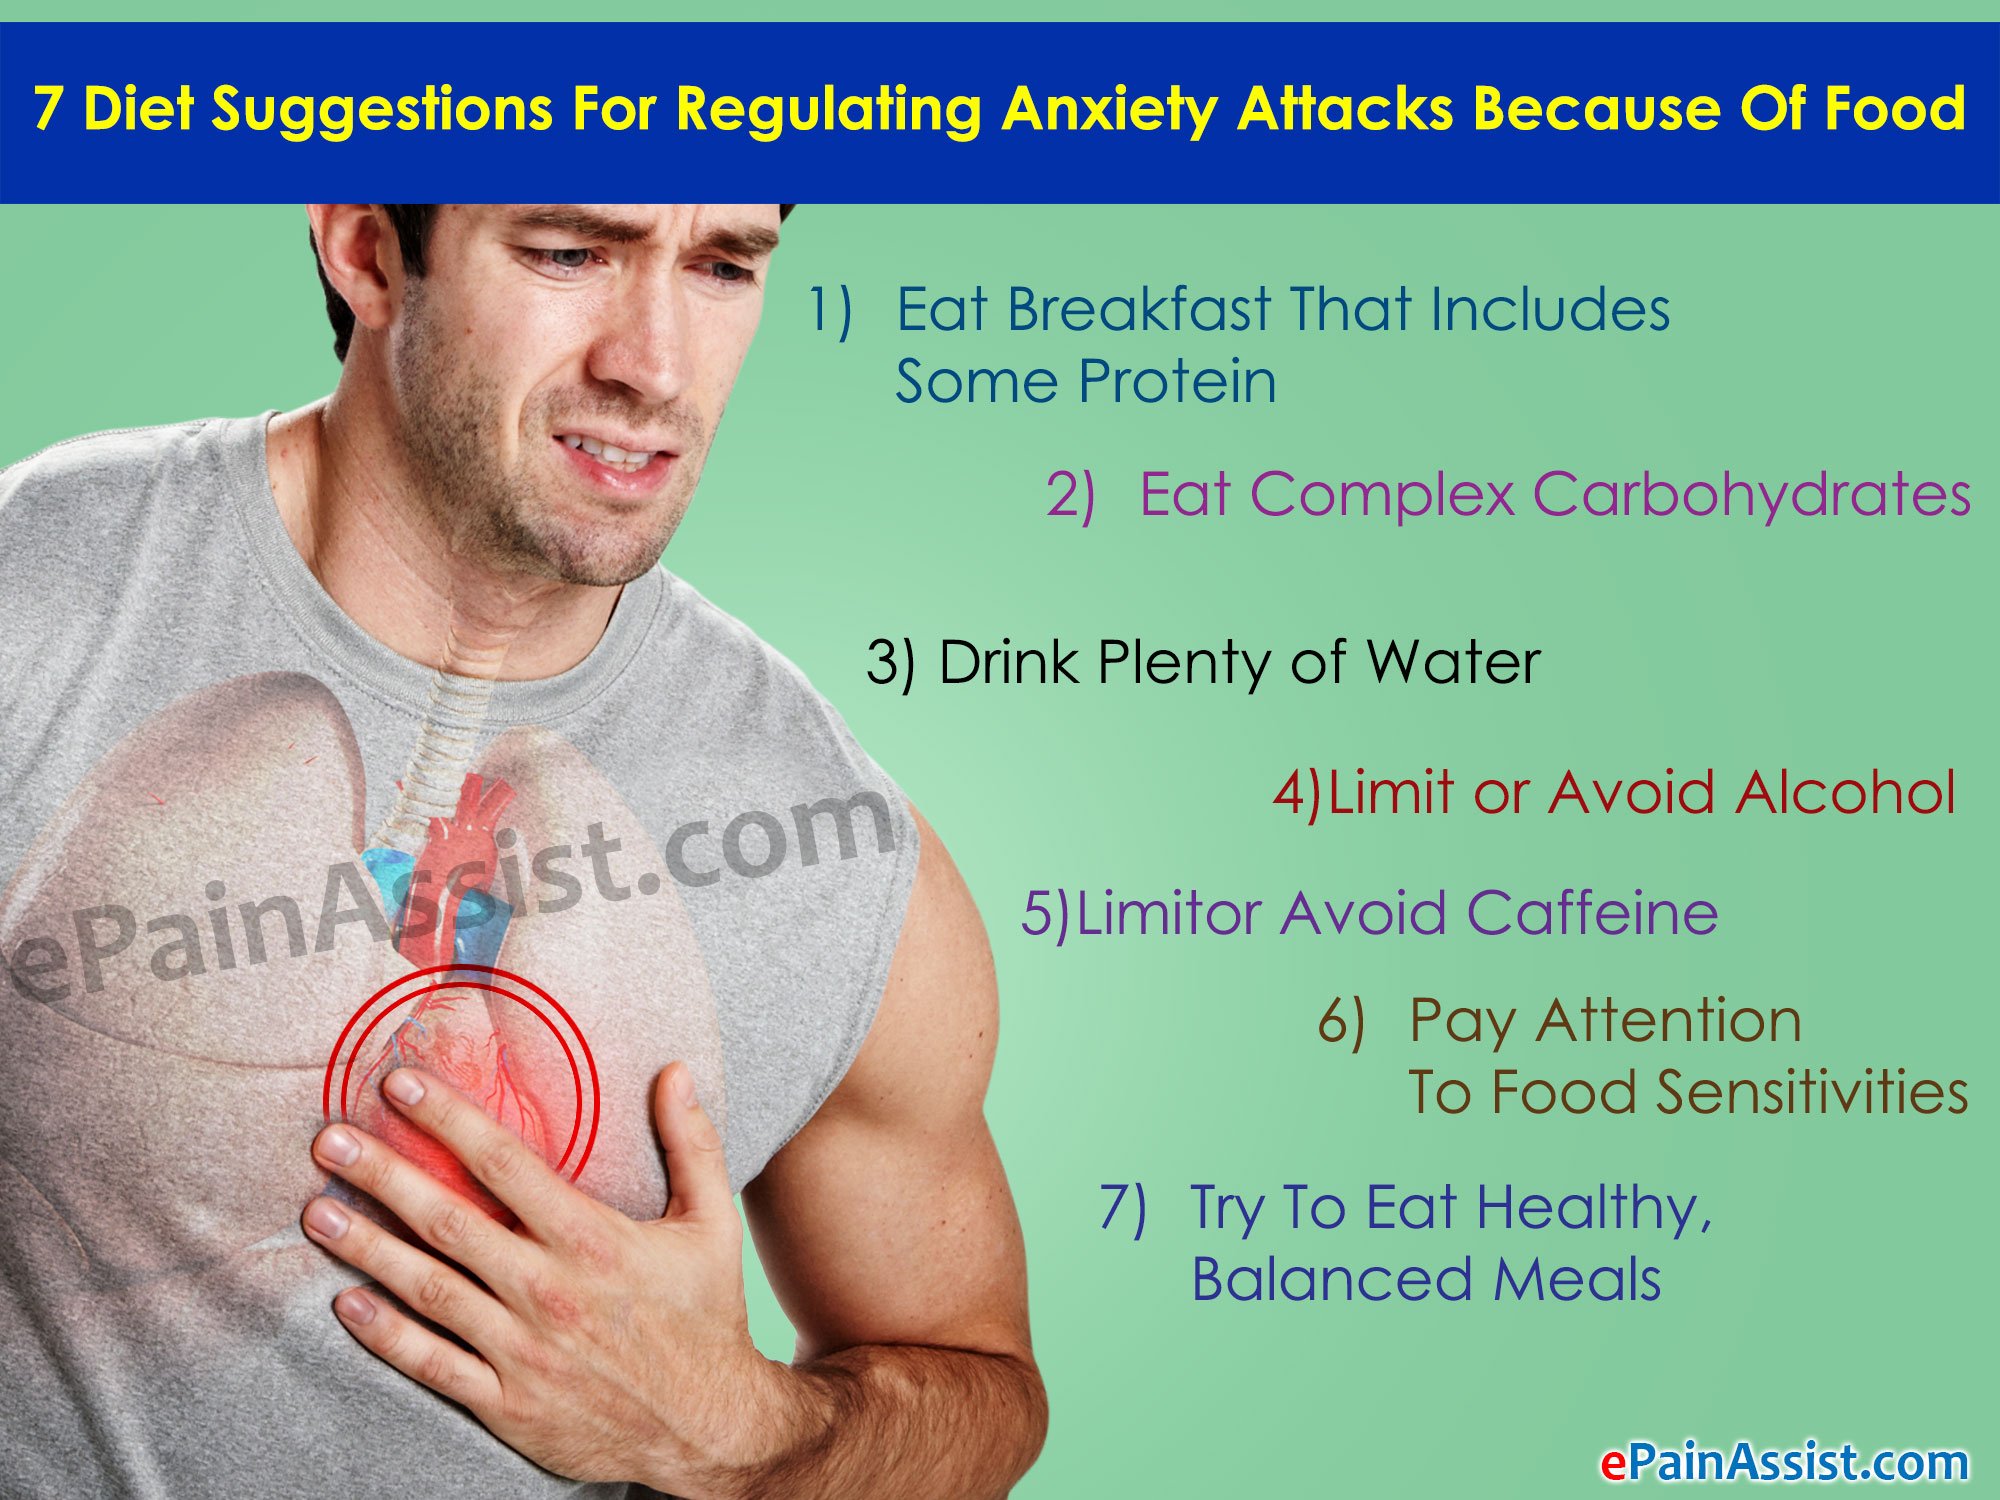 Foods That Trigger Anxiety Attacks